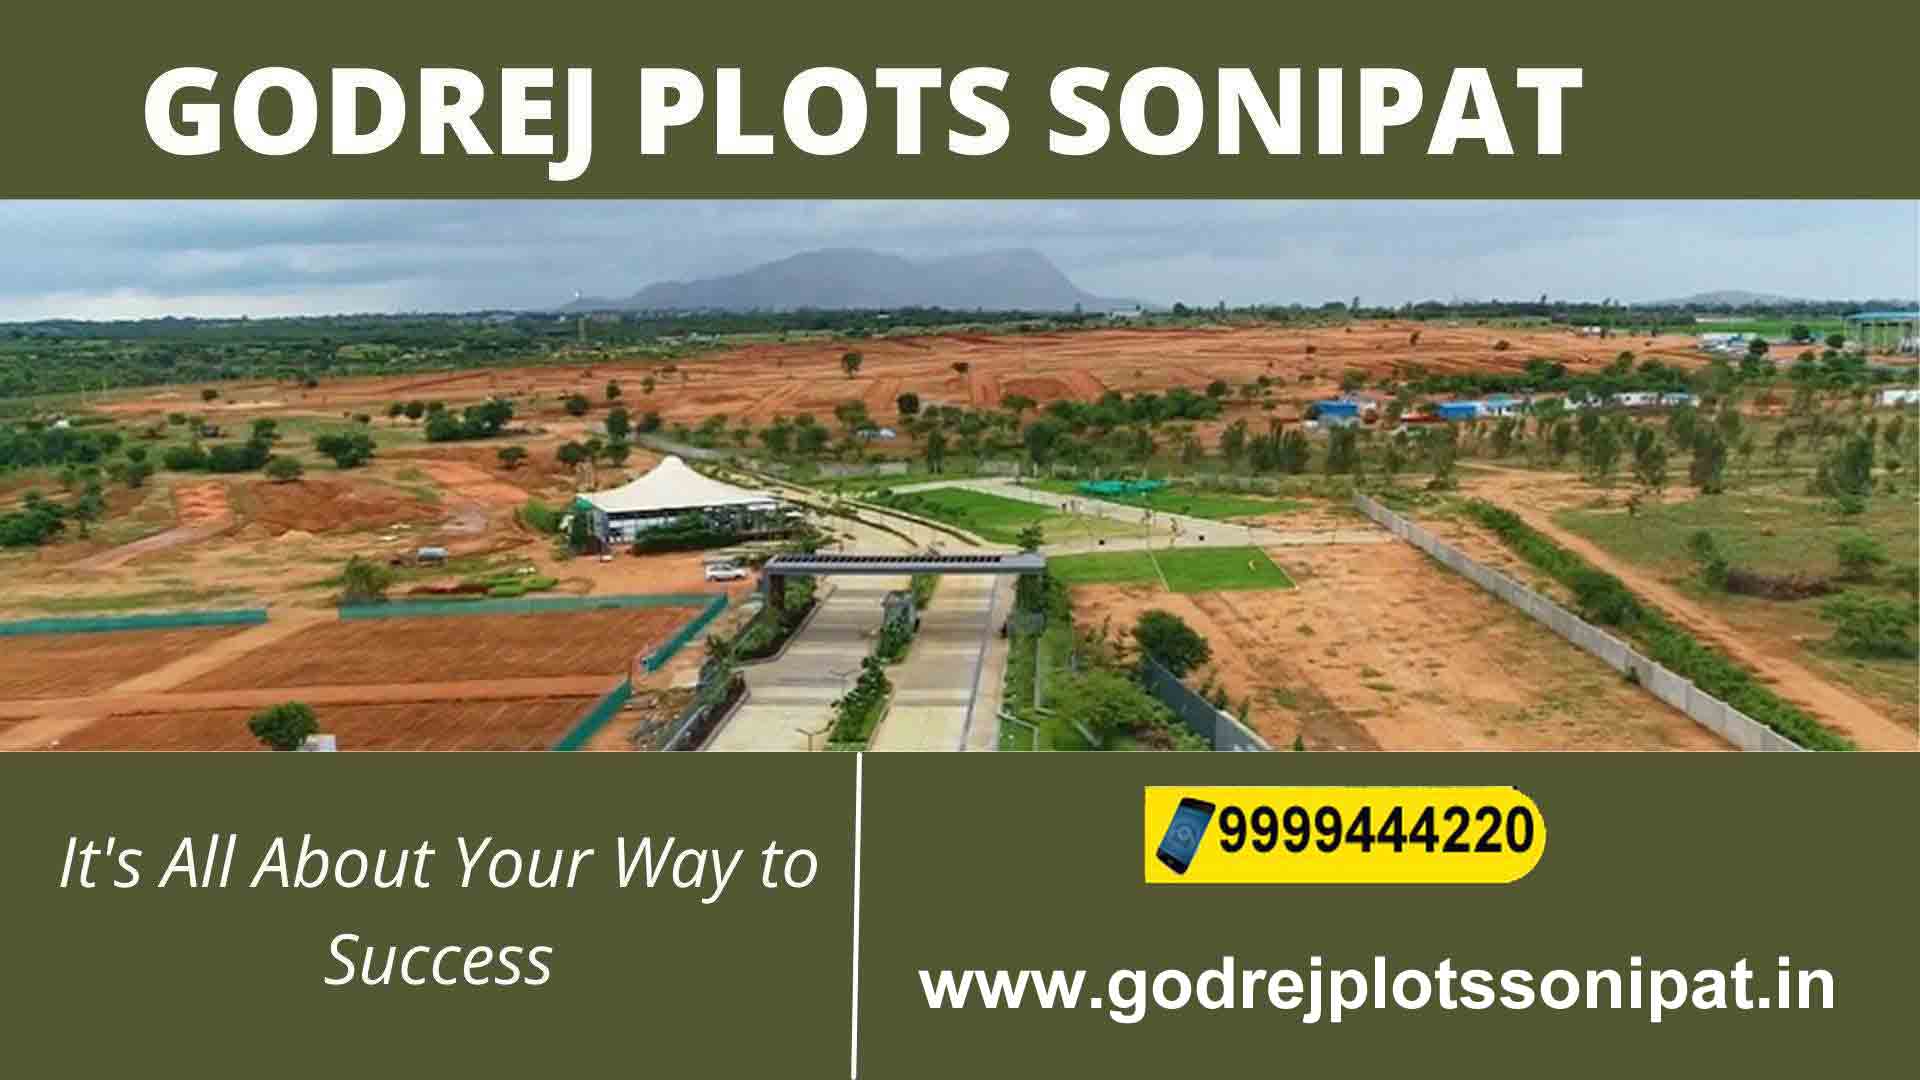 At Competitive Price for Godrej Plots Sonipat Residential development